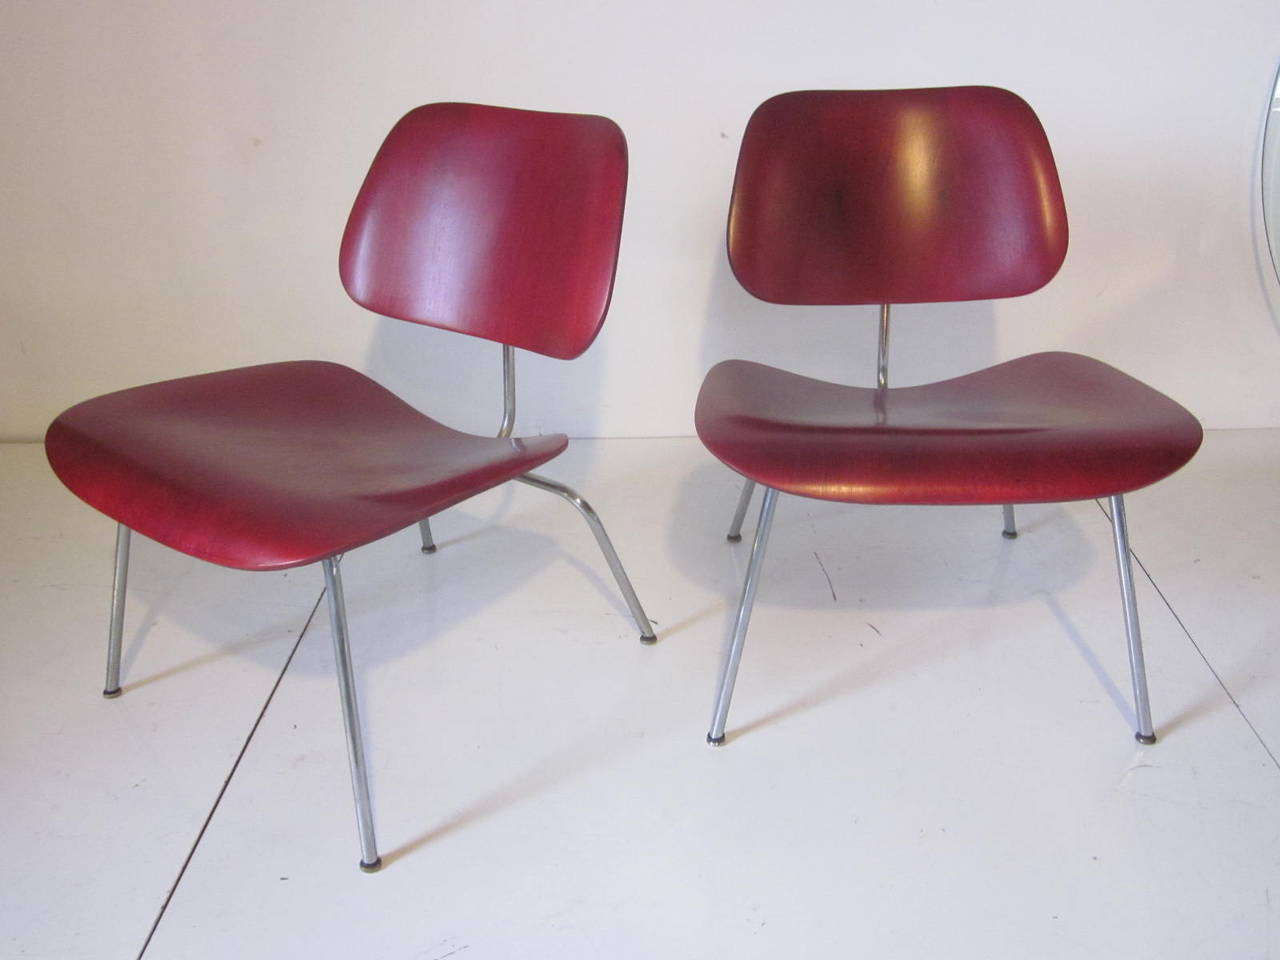 A pair of early original aniline dyed LCM (lounge chairs metal) bases with the early feet that screw into the legs, in a warm red on molded plywood. Manufactured by the Herman Miller Furniture Company.